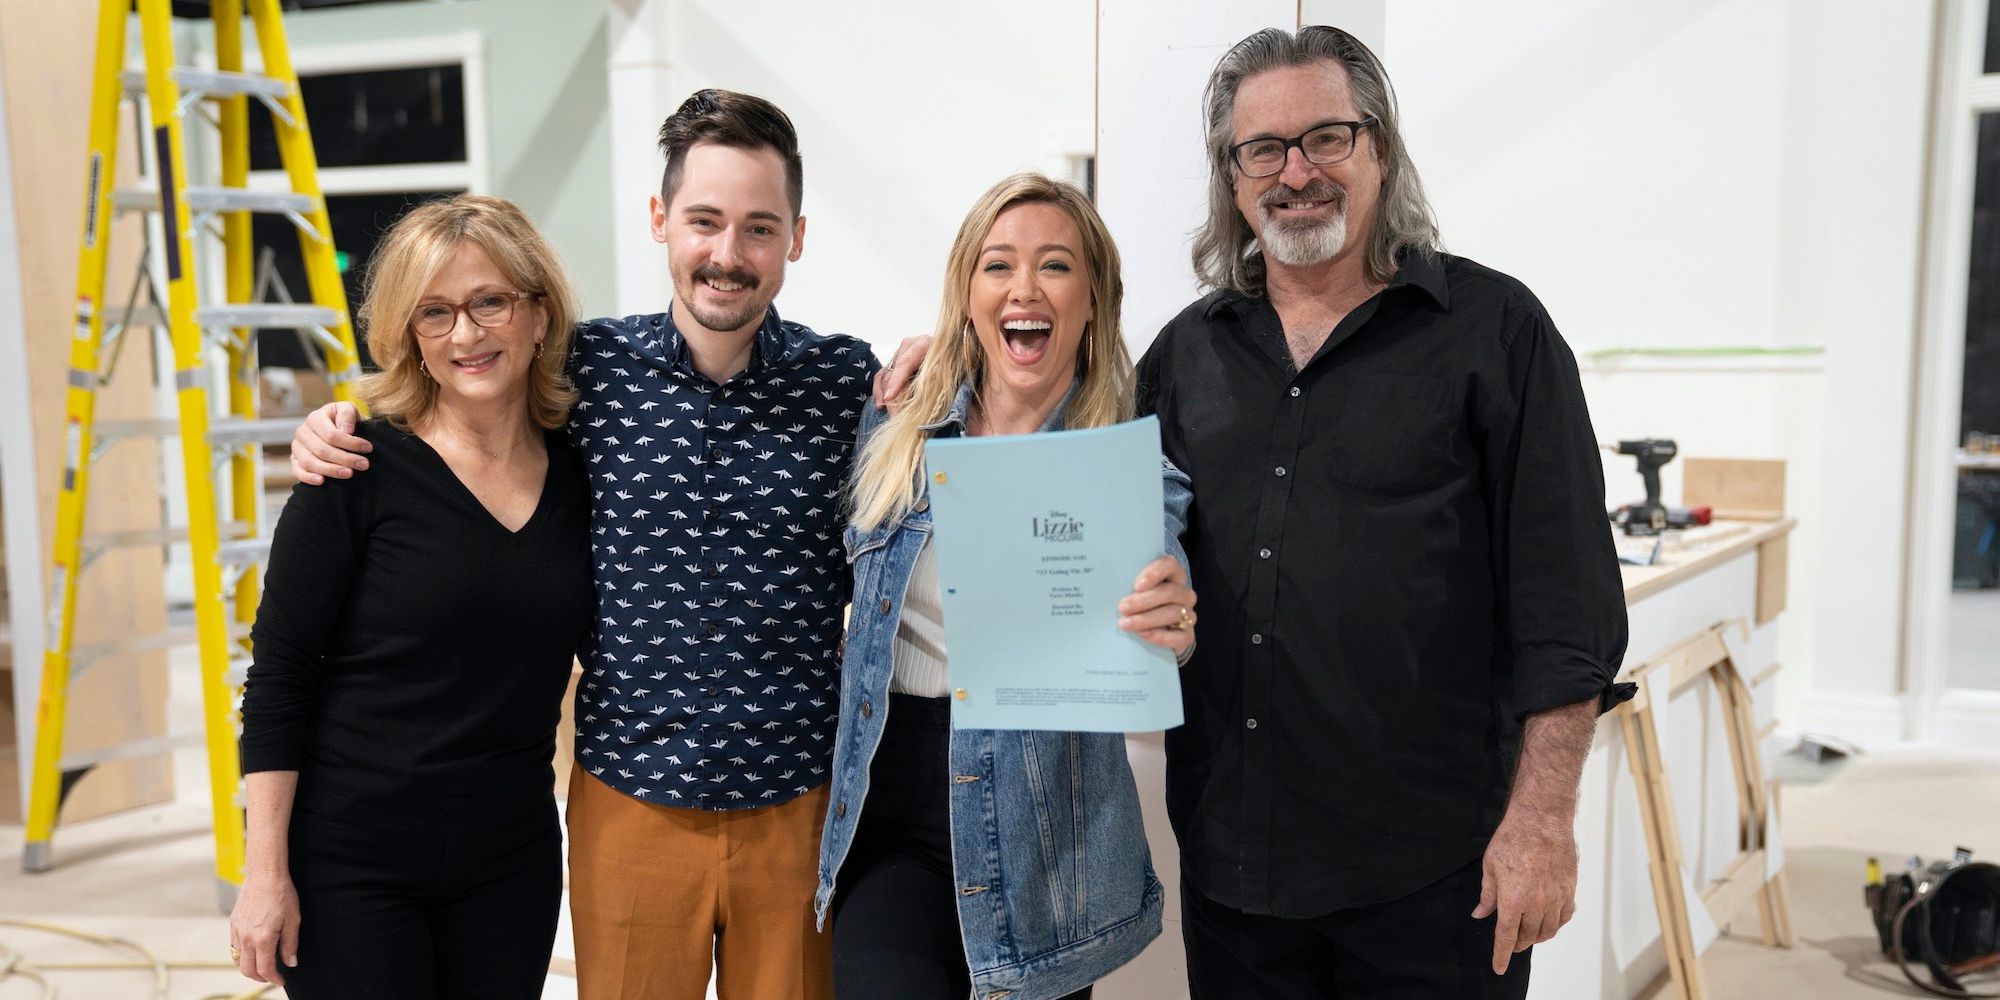 Hallie Todd, Jake Thomas, Hilary Duff and Robert Carradine on set for Lizzie McGuire Disney+ series